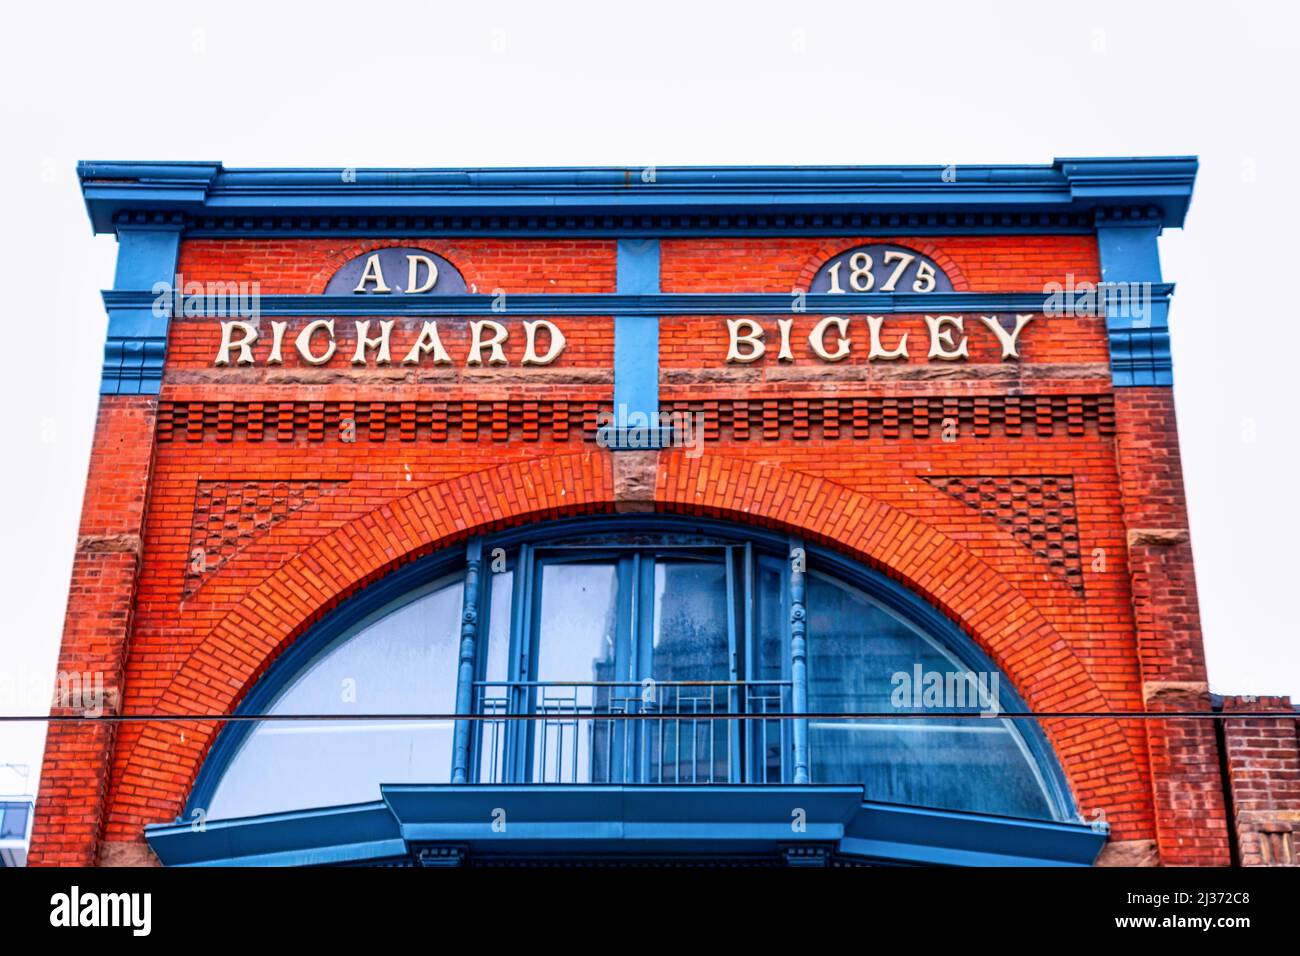 Colonial architecture detail with an arched structure of the Richard Bigley building which was constructed in 1873. The landmark is seen in Queen St. Stock Photo